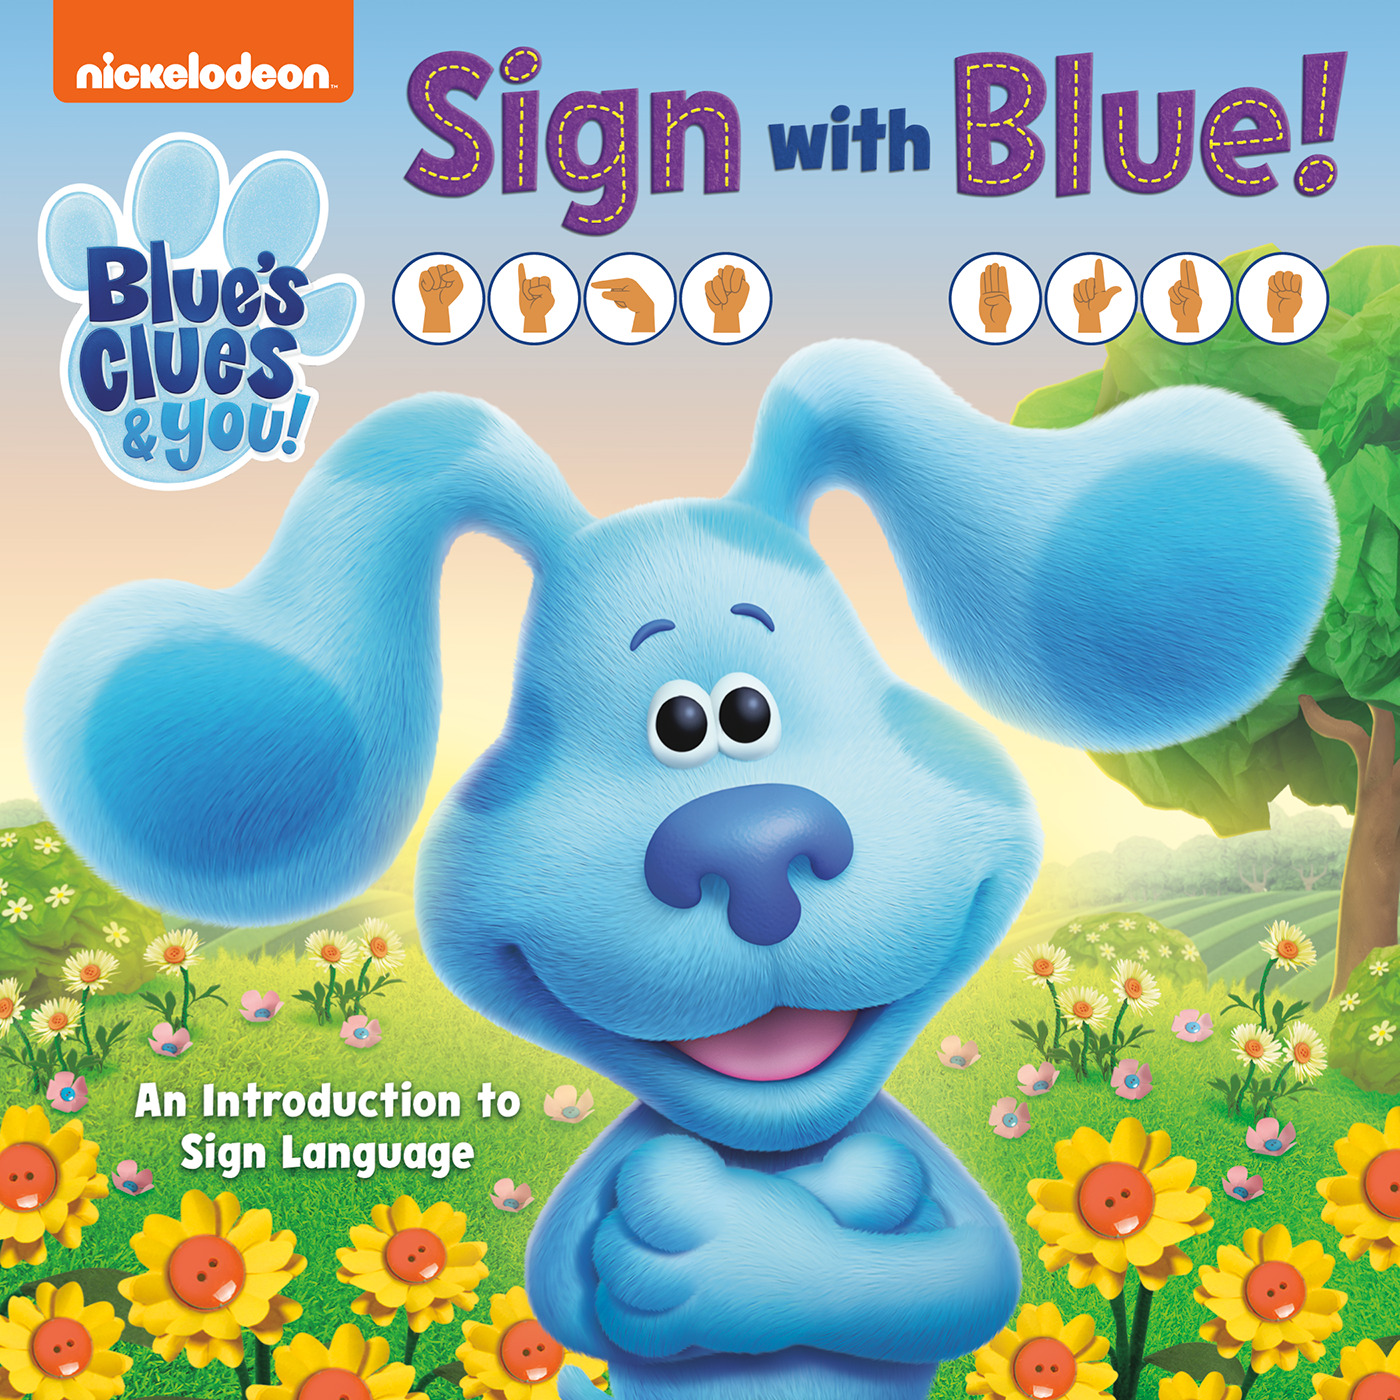 Sign with Blue! (Blue's Clues &amp; You) : An Introduction to Sign Language | Picture & board books